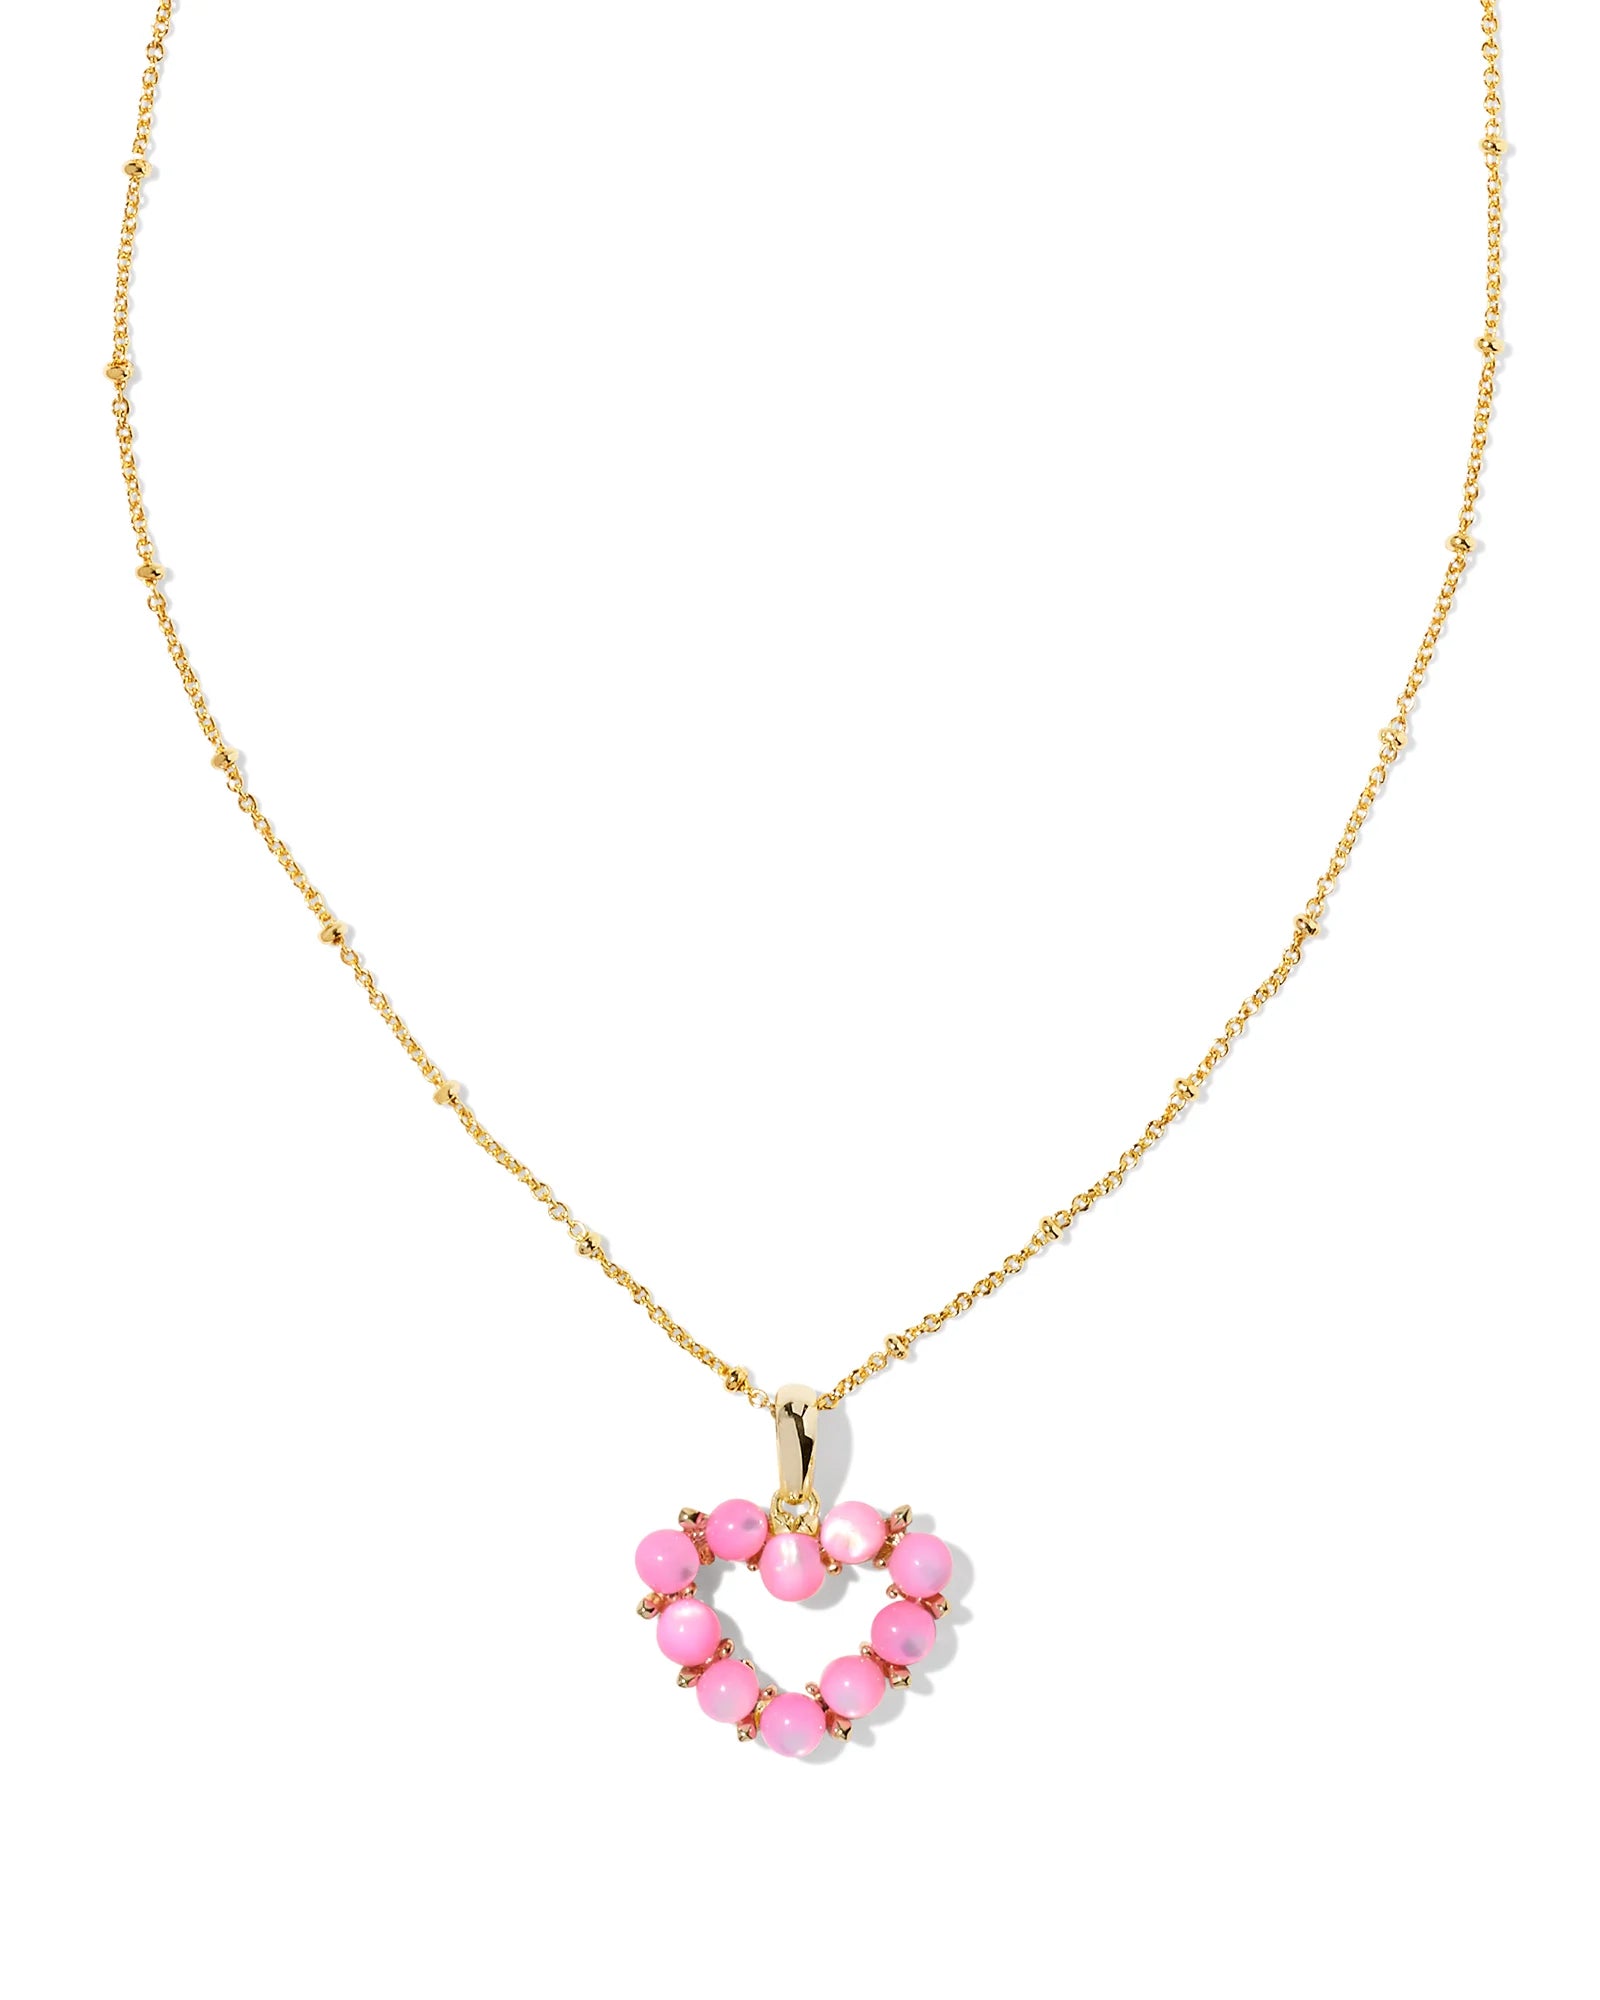 Ansley Heart Pendant Necklace in Rose Gold | Kendra Scott | Kendra Scott |  103.1.0 - controllers